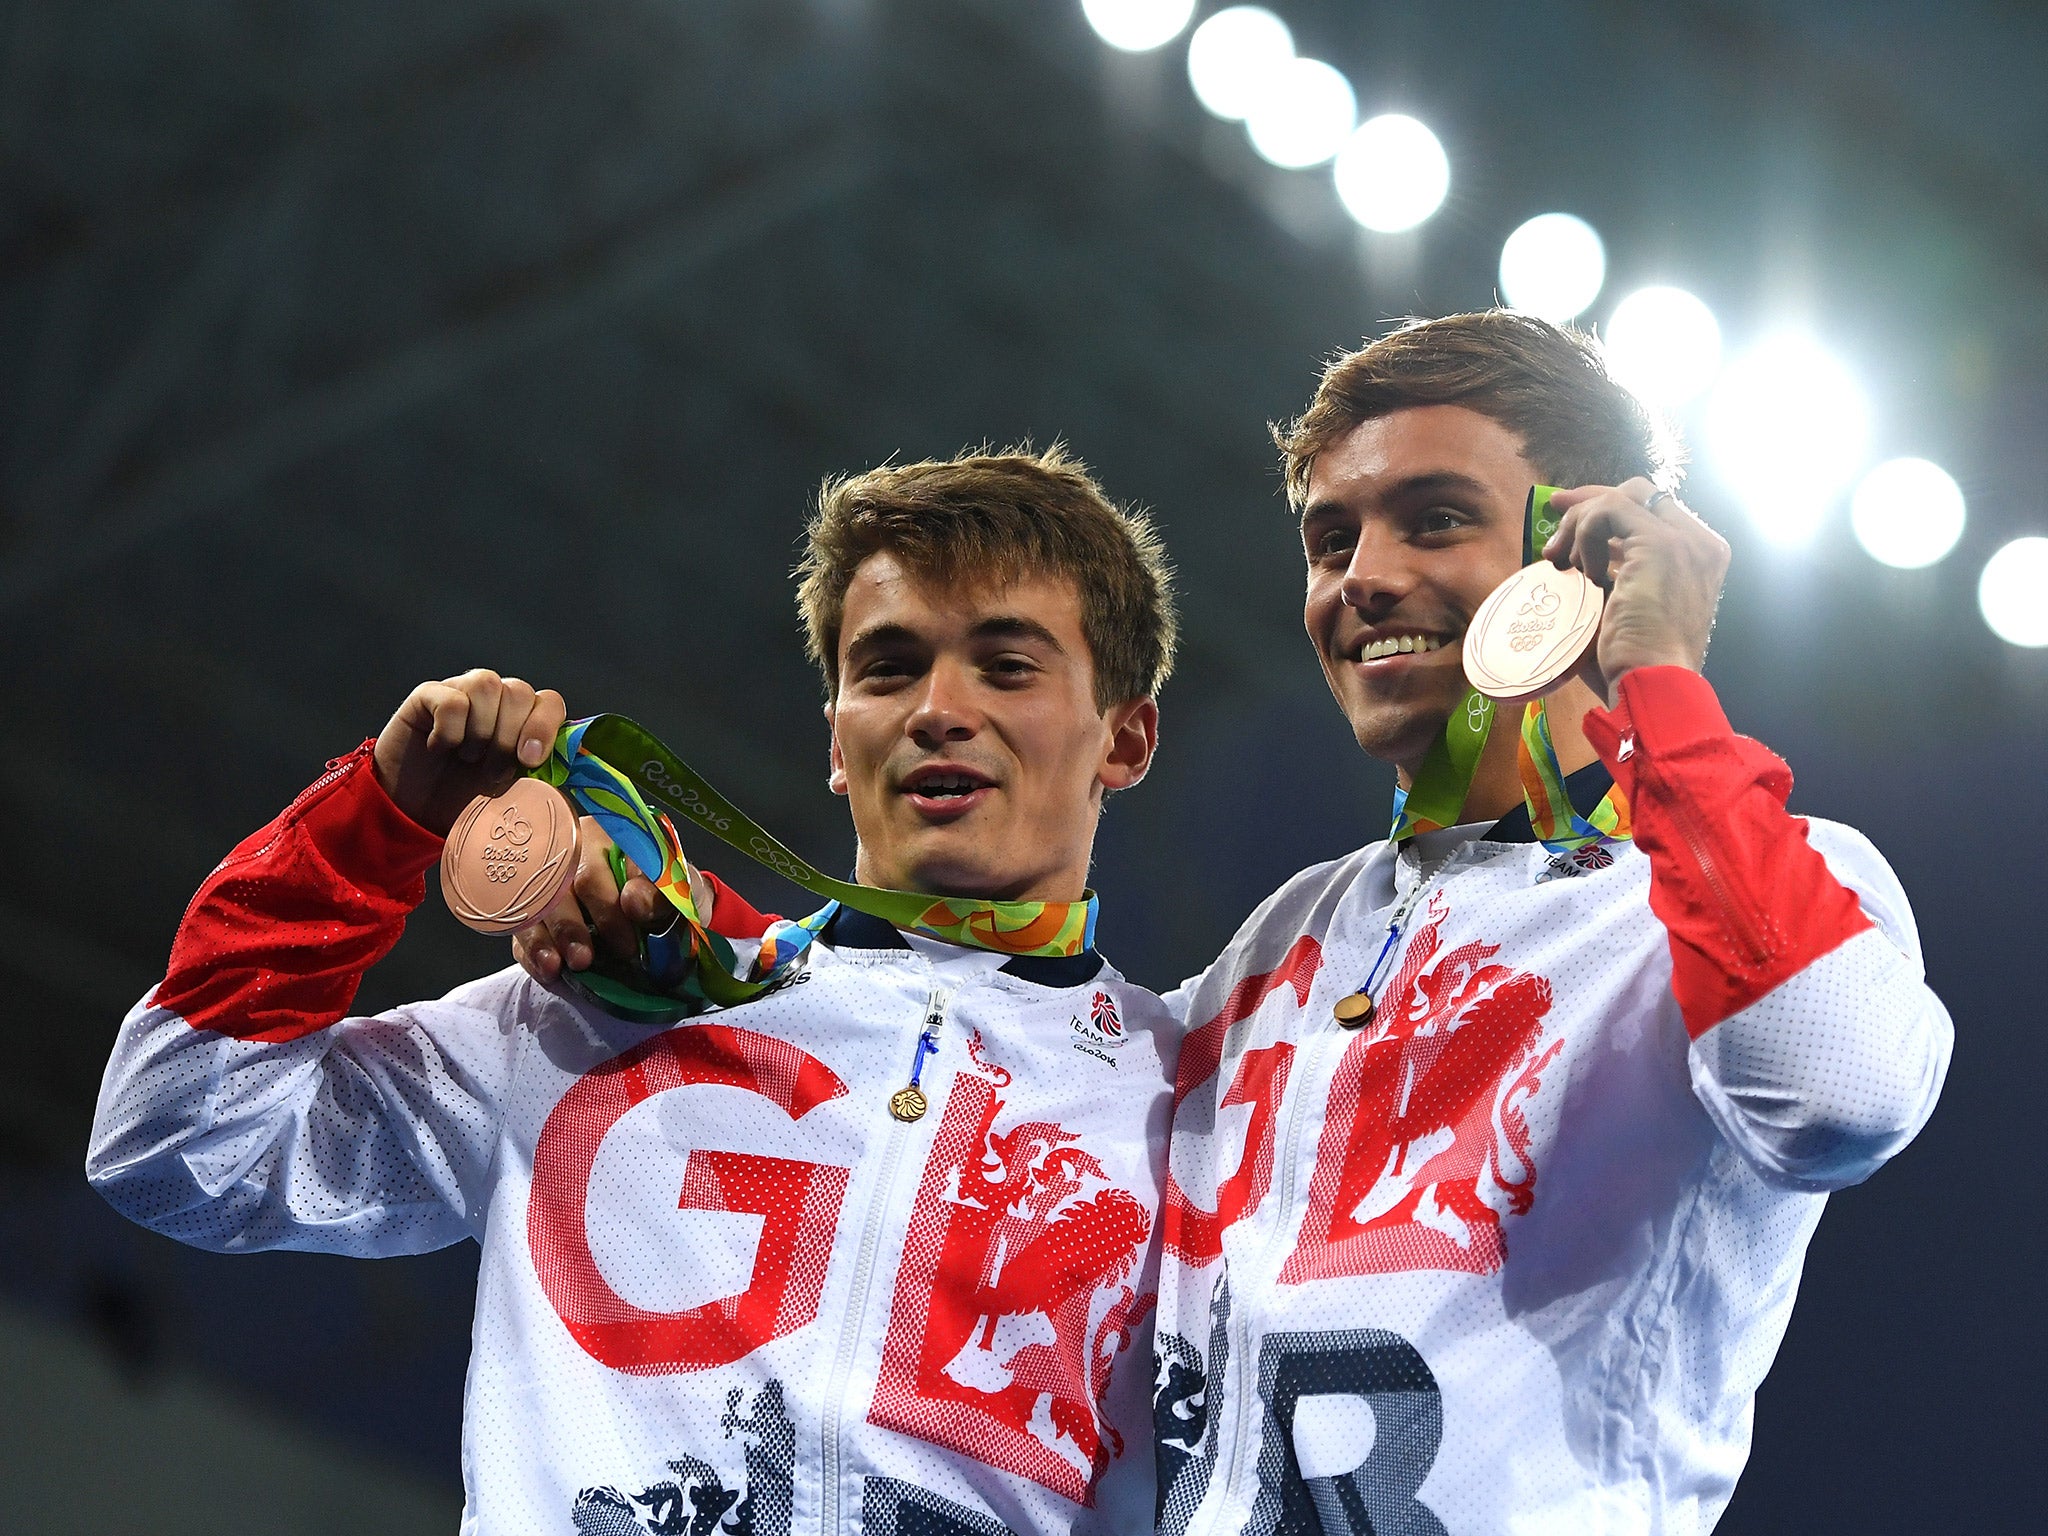 Dan Goodfellow and Tom Daley won 10m synchronised diving bronze on Monday